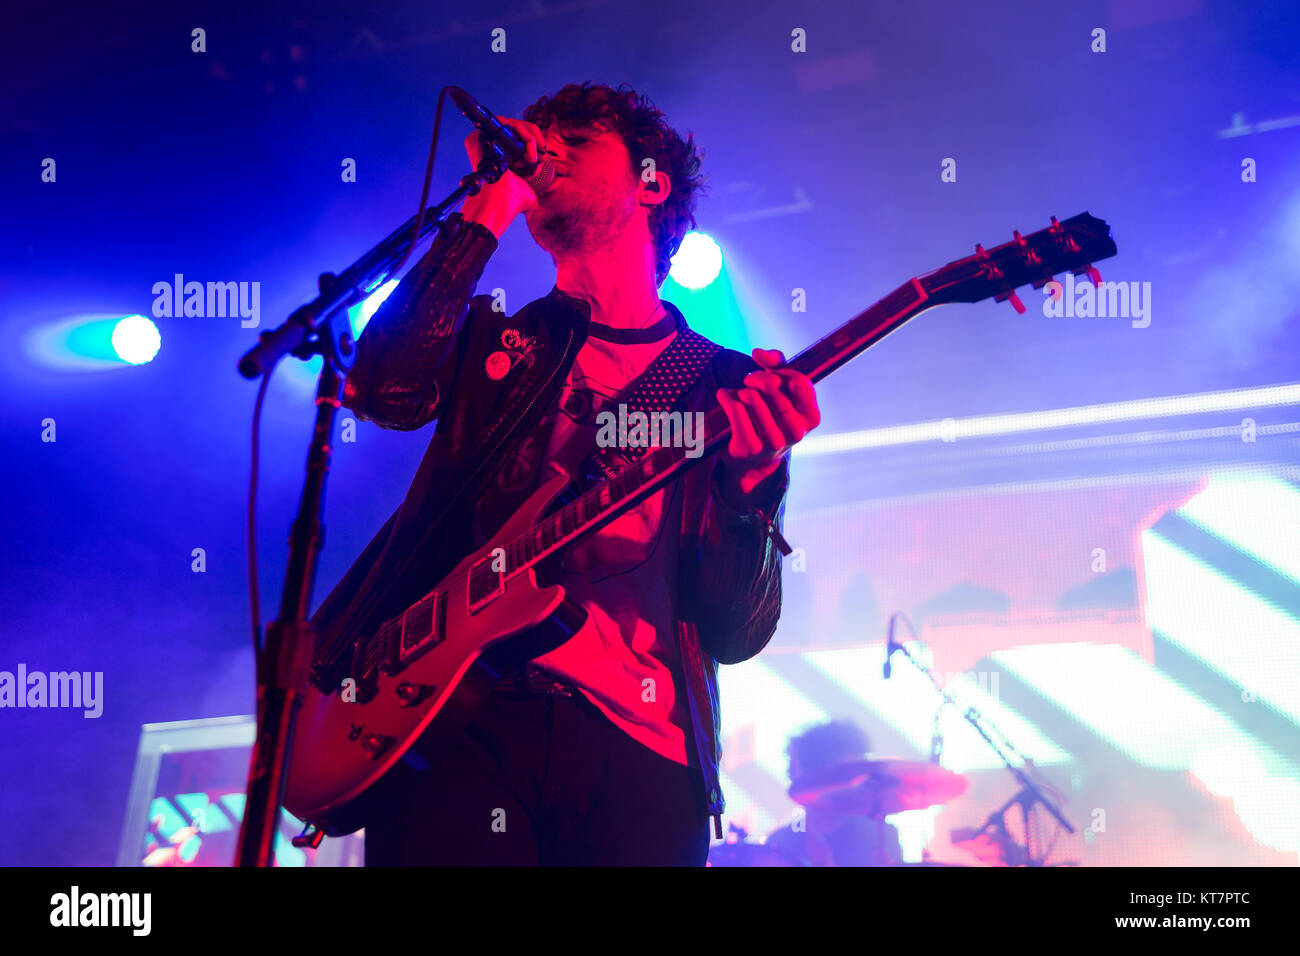 The English indie rock band The Kooks performs a live concert at Sentrum Scenen in Oslo. Here musician, singer and songwriter Luke Pritchard is seen live on stage. Norway, 10/02 2015. Stock Photo